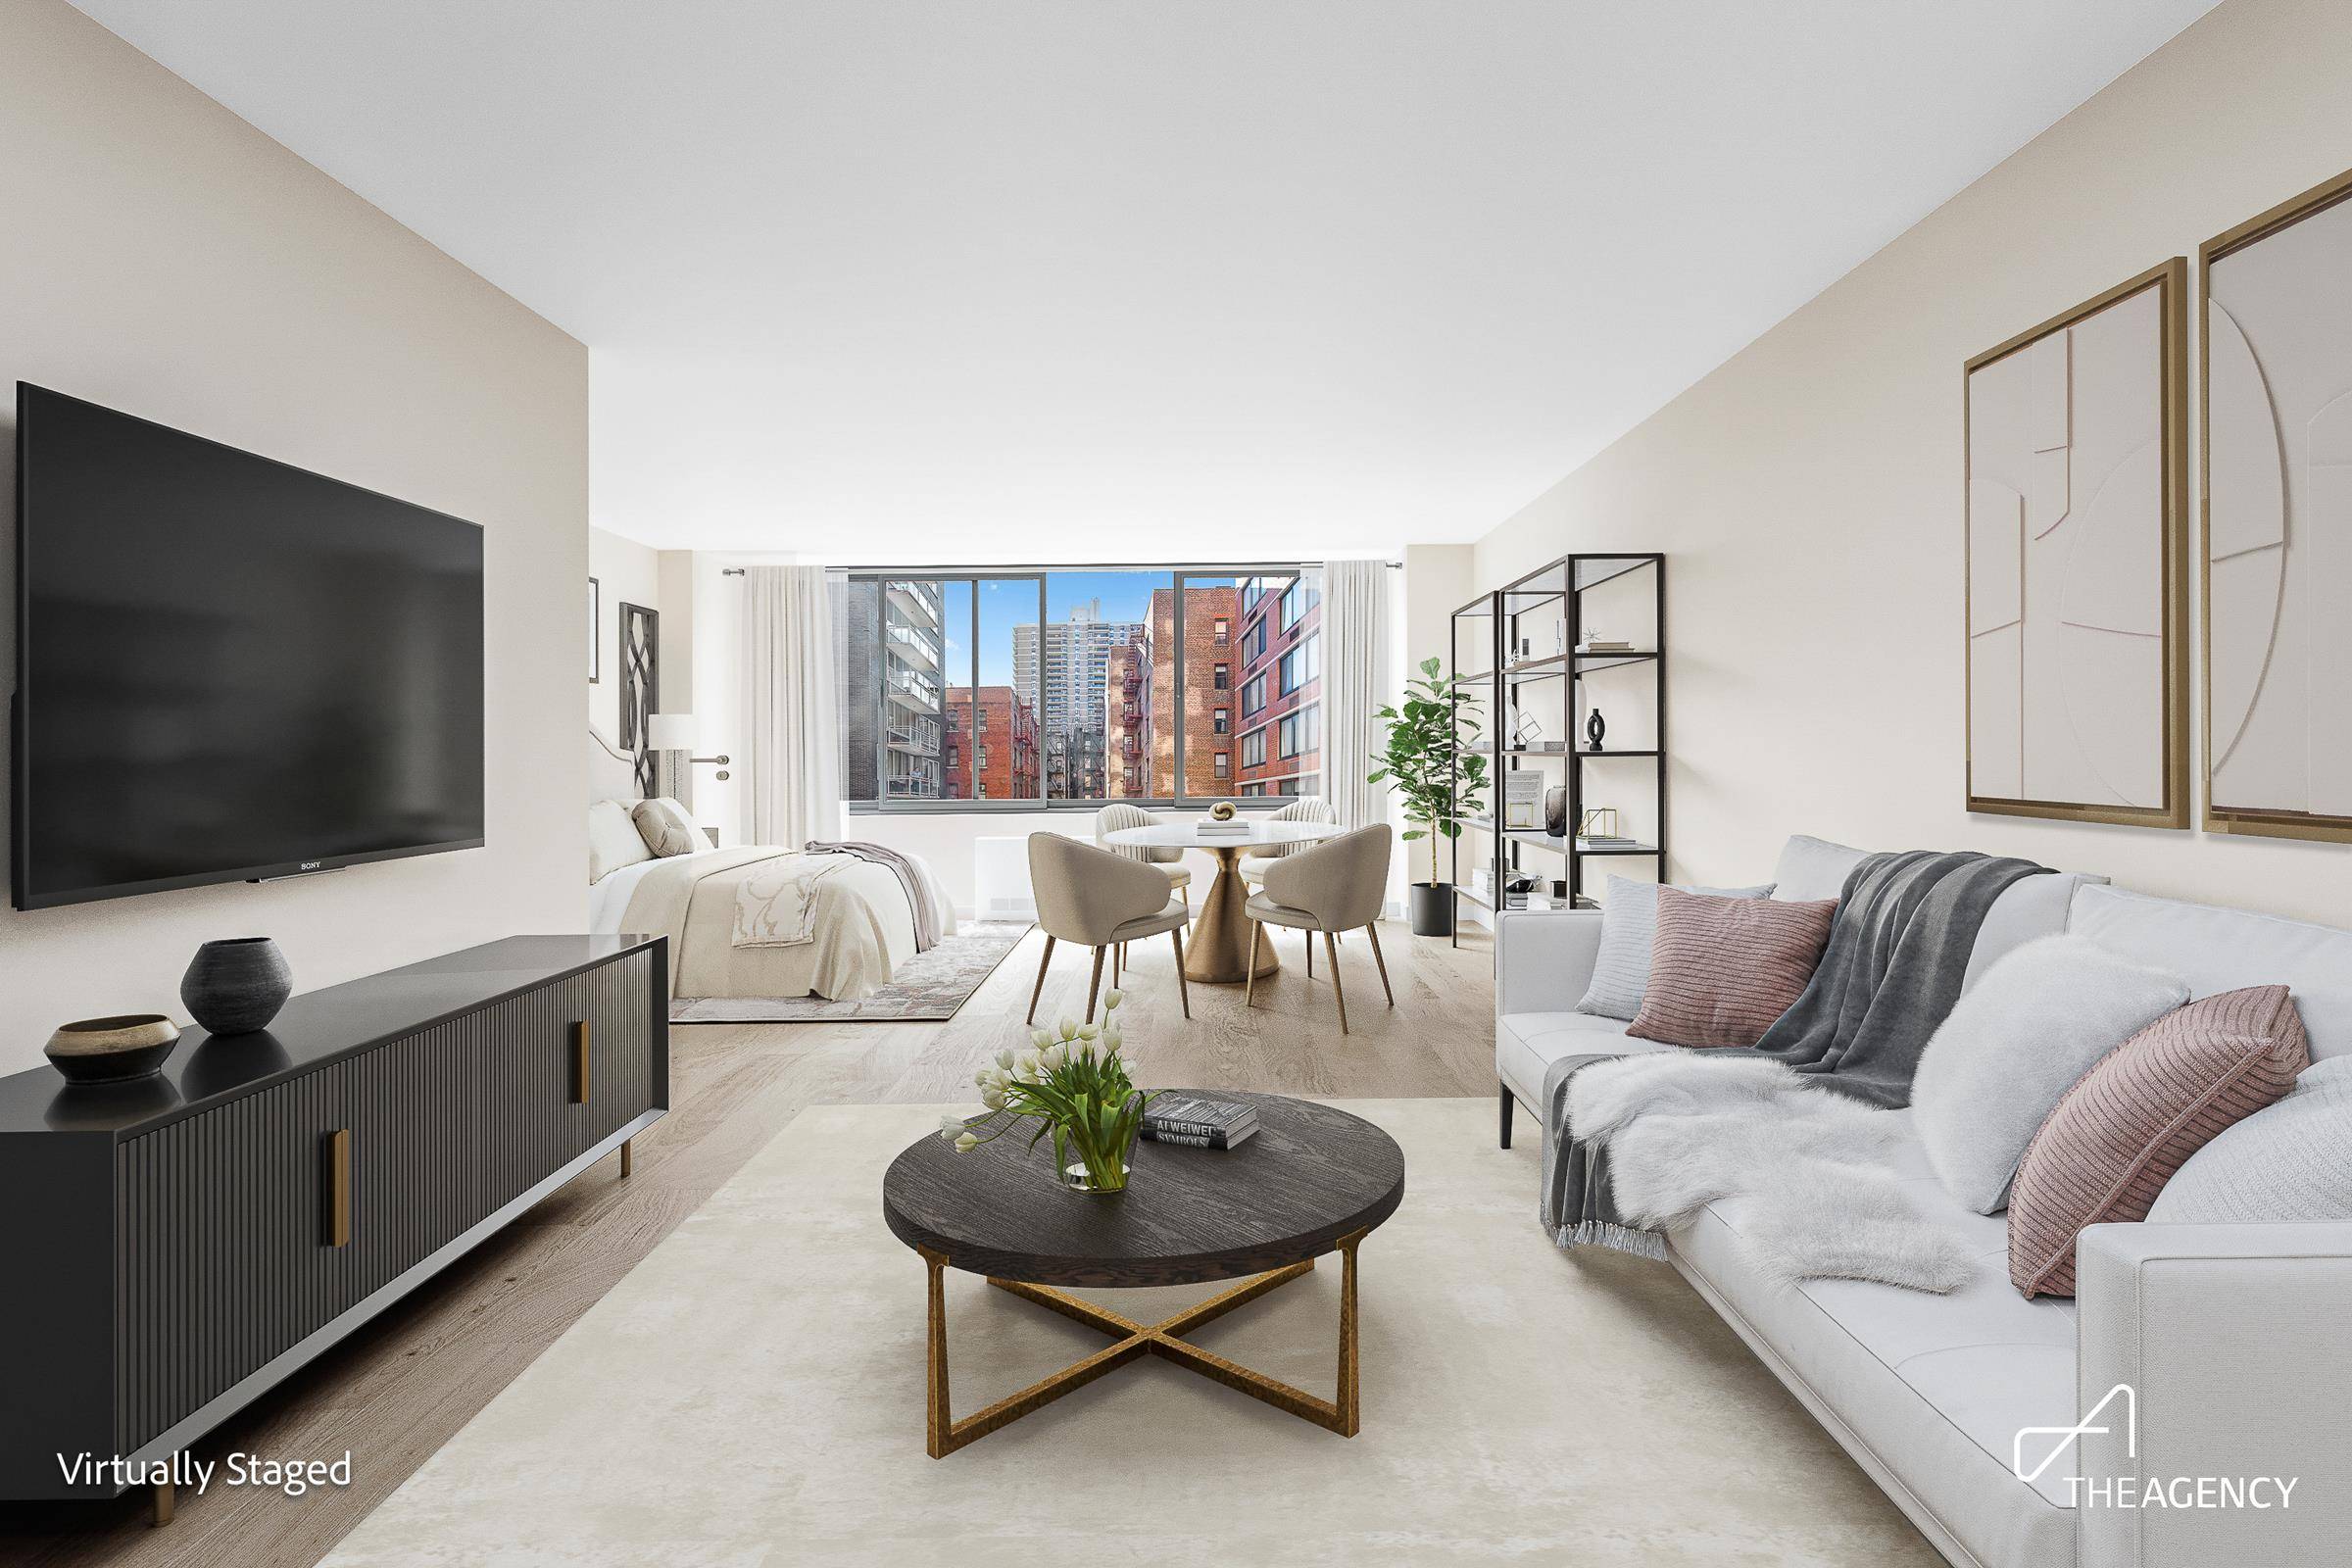 FIRST SHOWINGS ON SUNDAY, MAY 5THBright and airy studio apartment nestled in the vibrant heart of the Upper West Side.